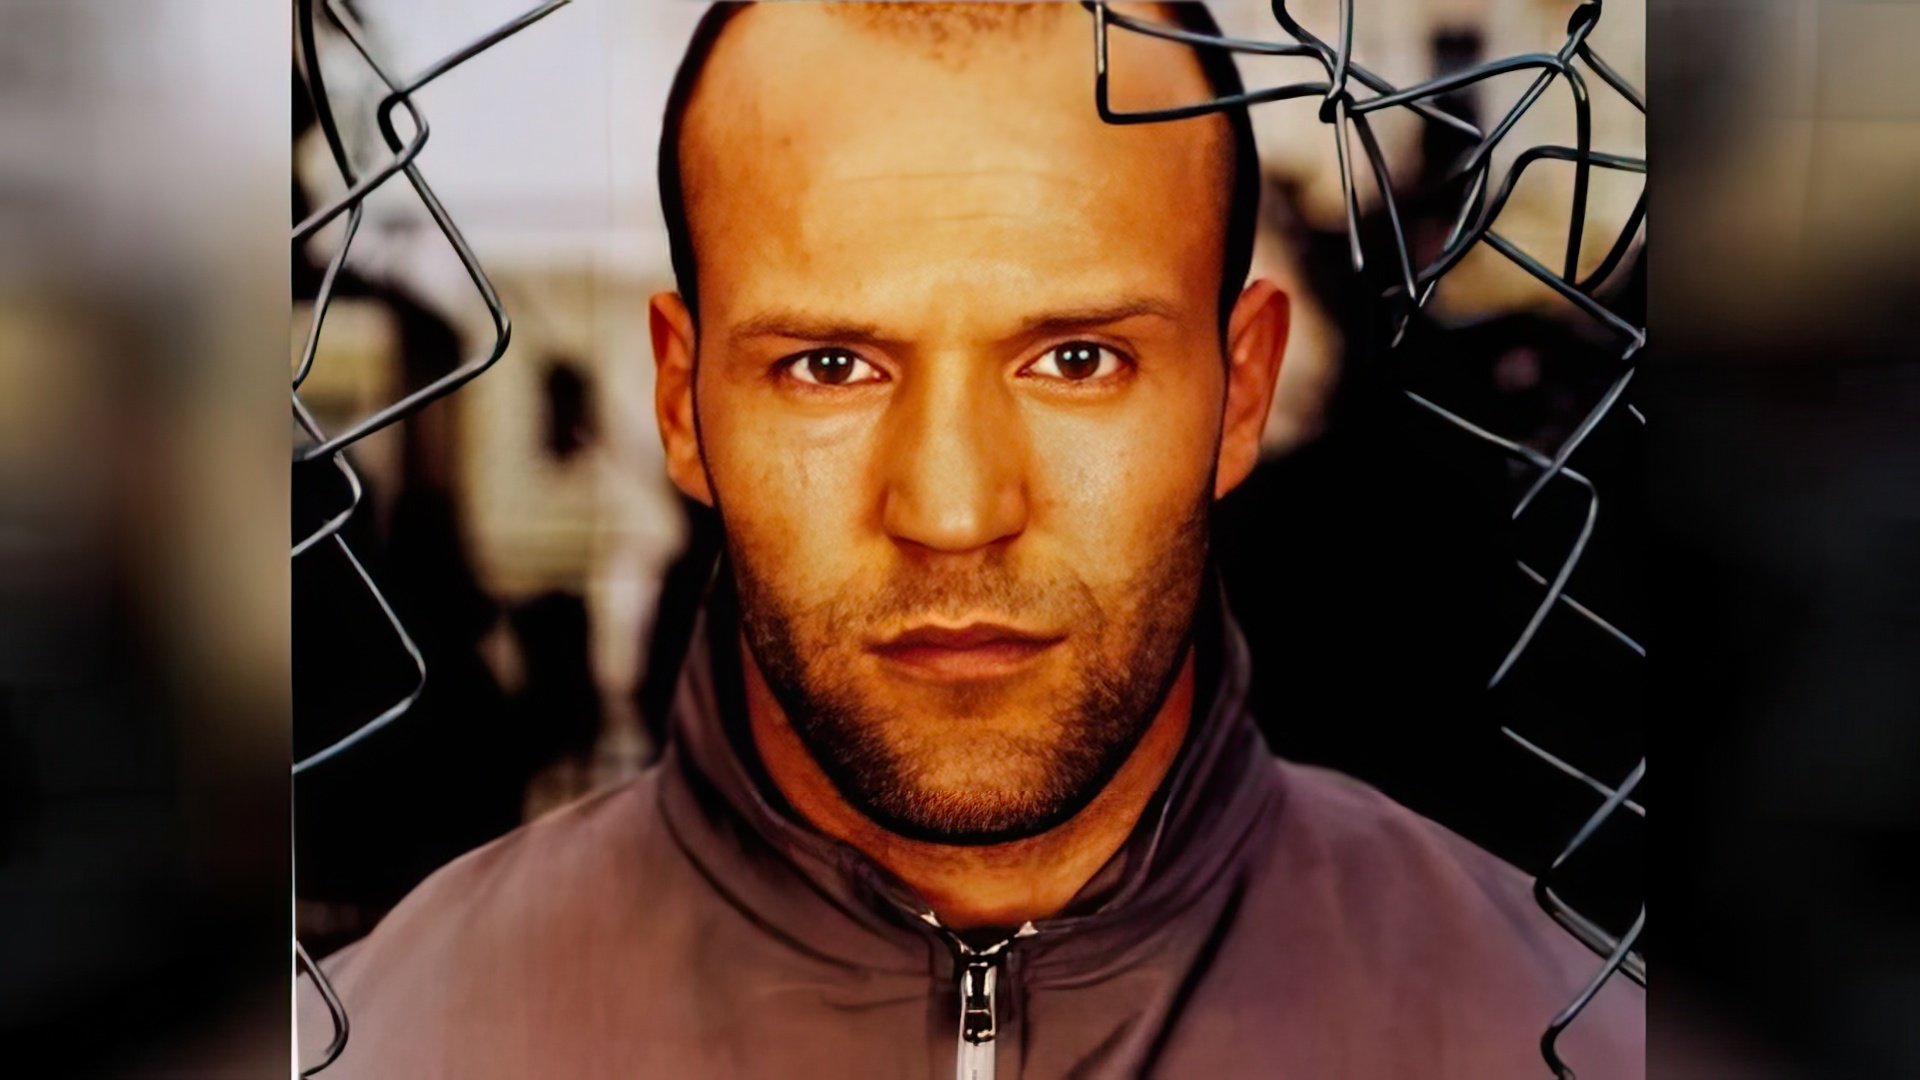 Being young Jason Statham have traded stolen things in the streets